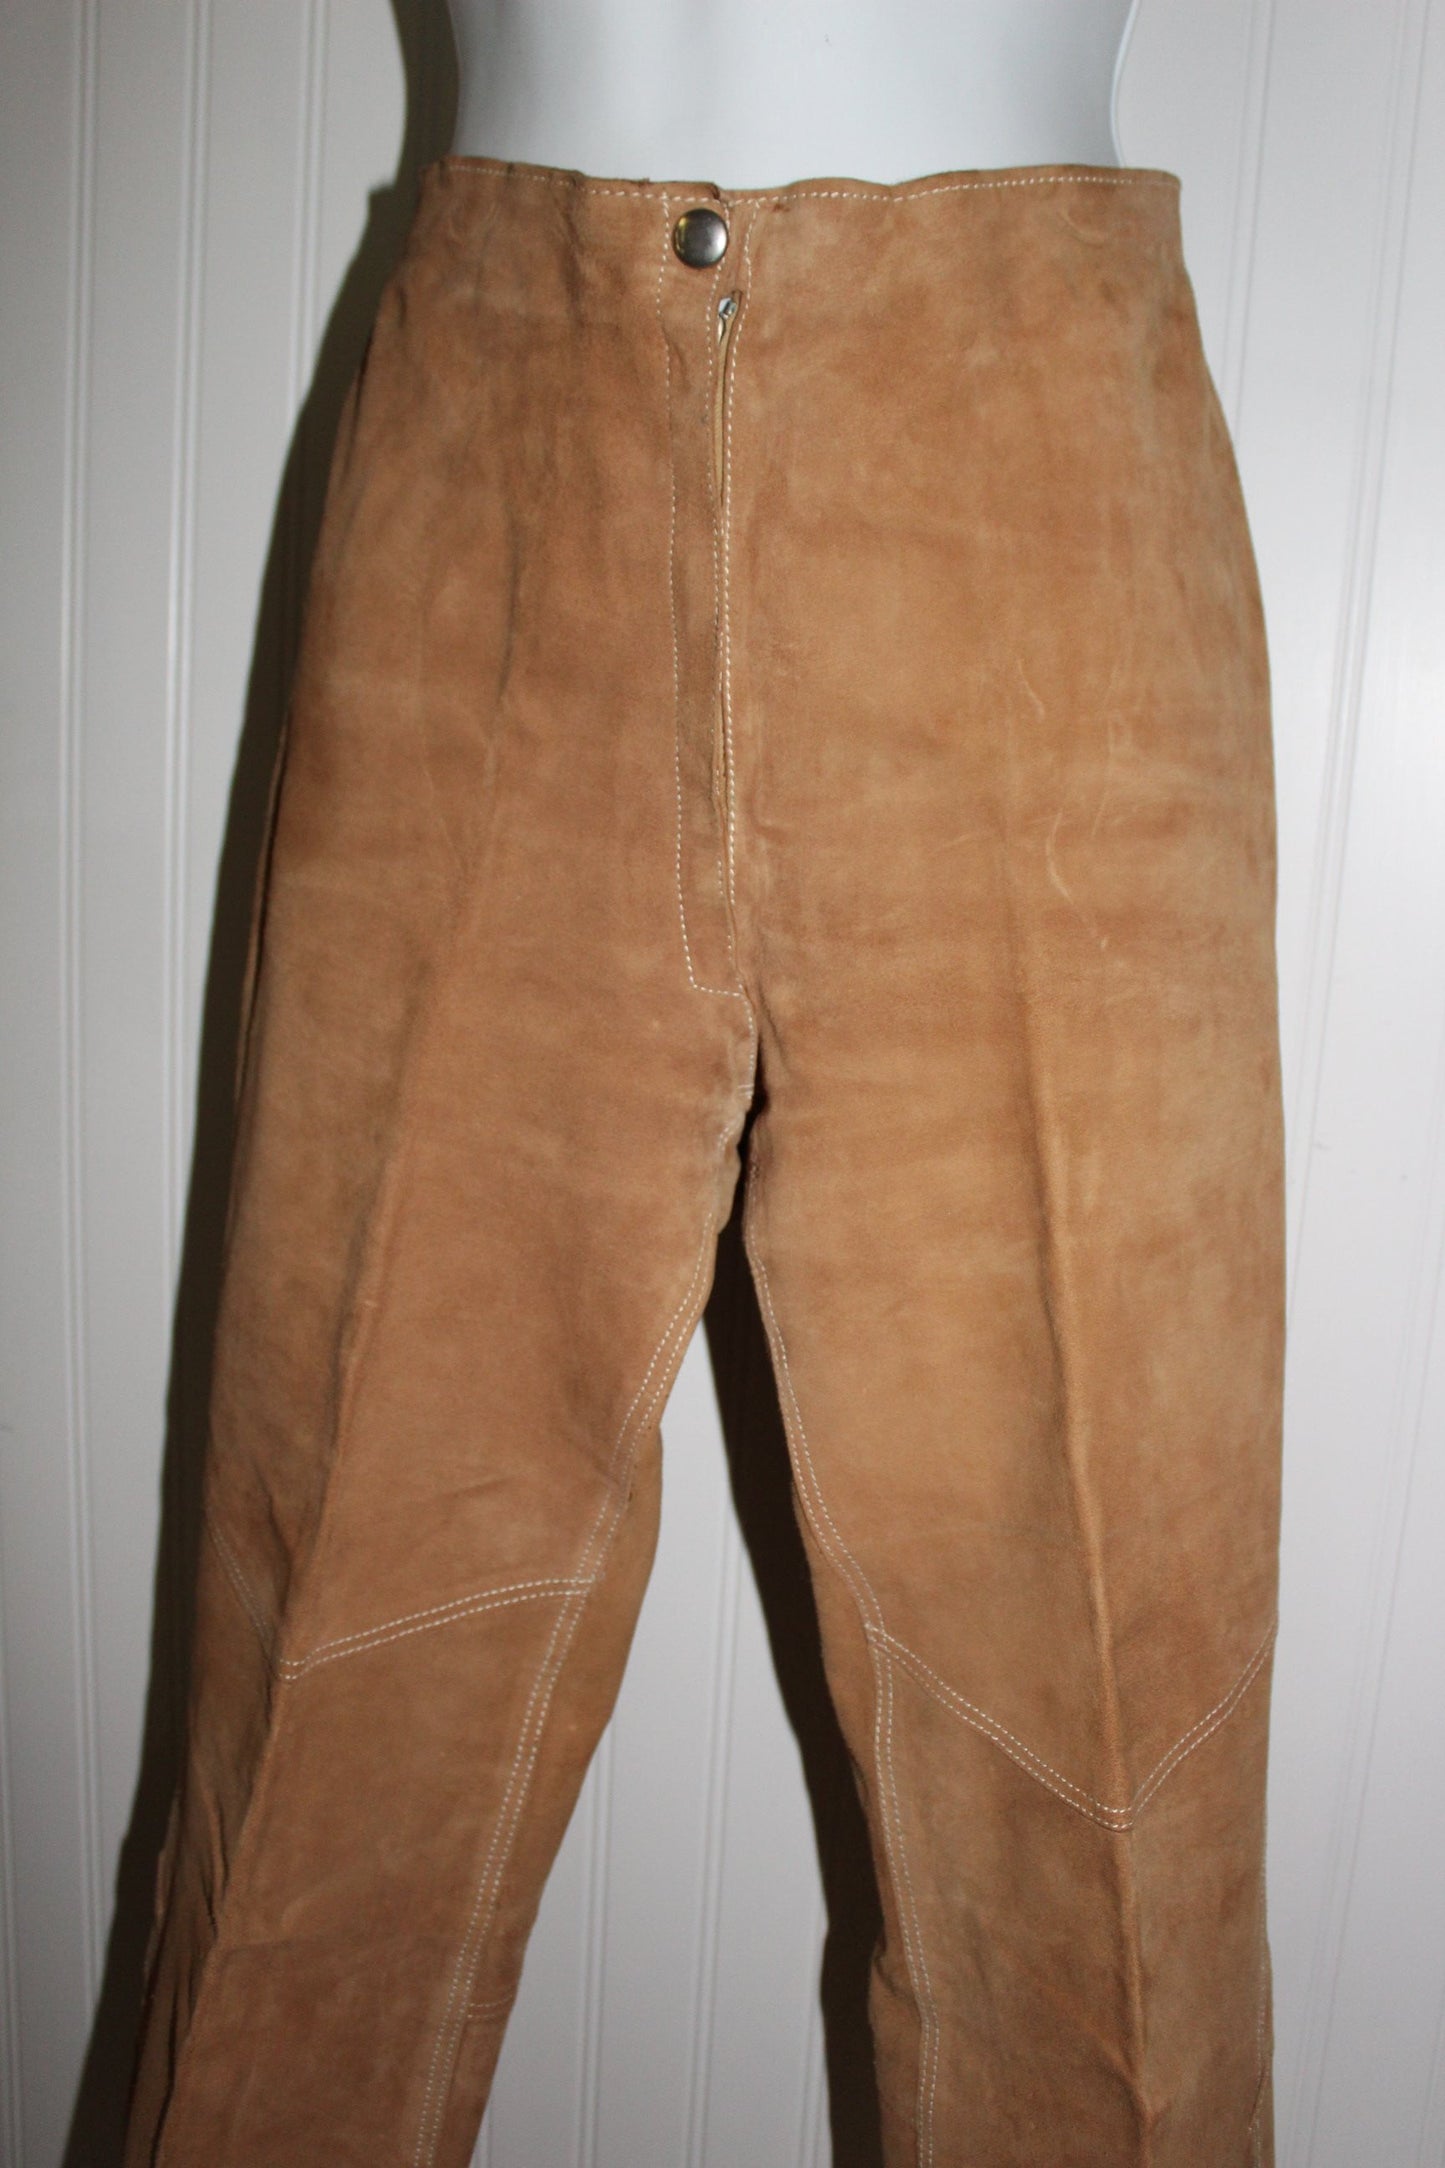 Vintage Leather Pants Laced Flare Leg Caramel Cream Top Stitch Great Detail